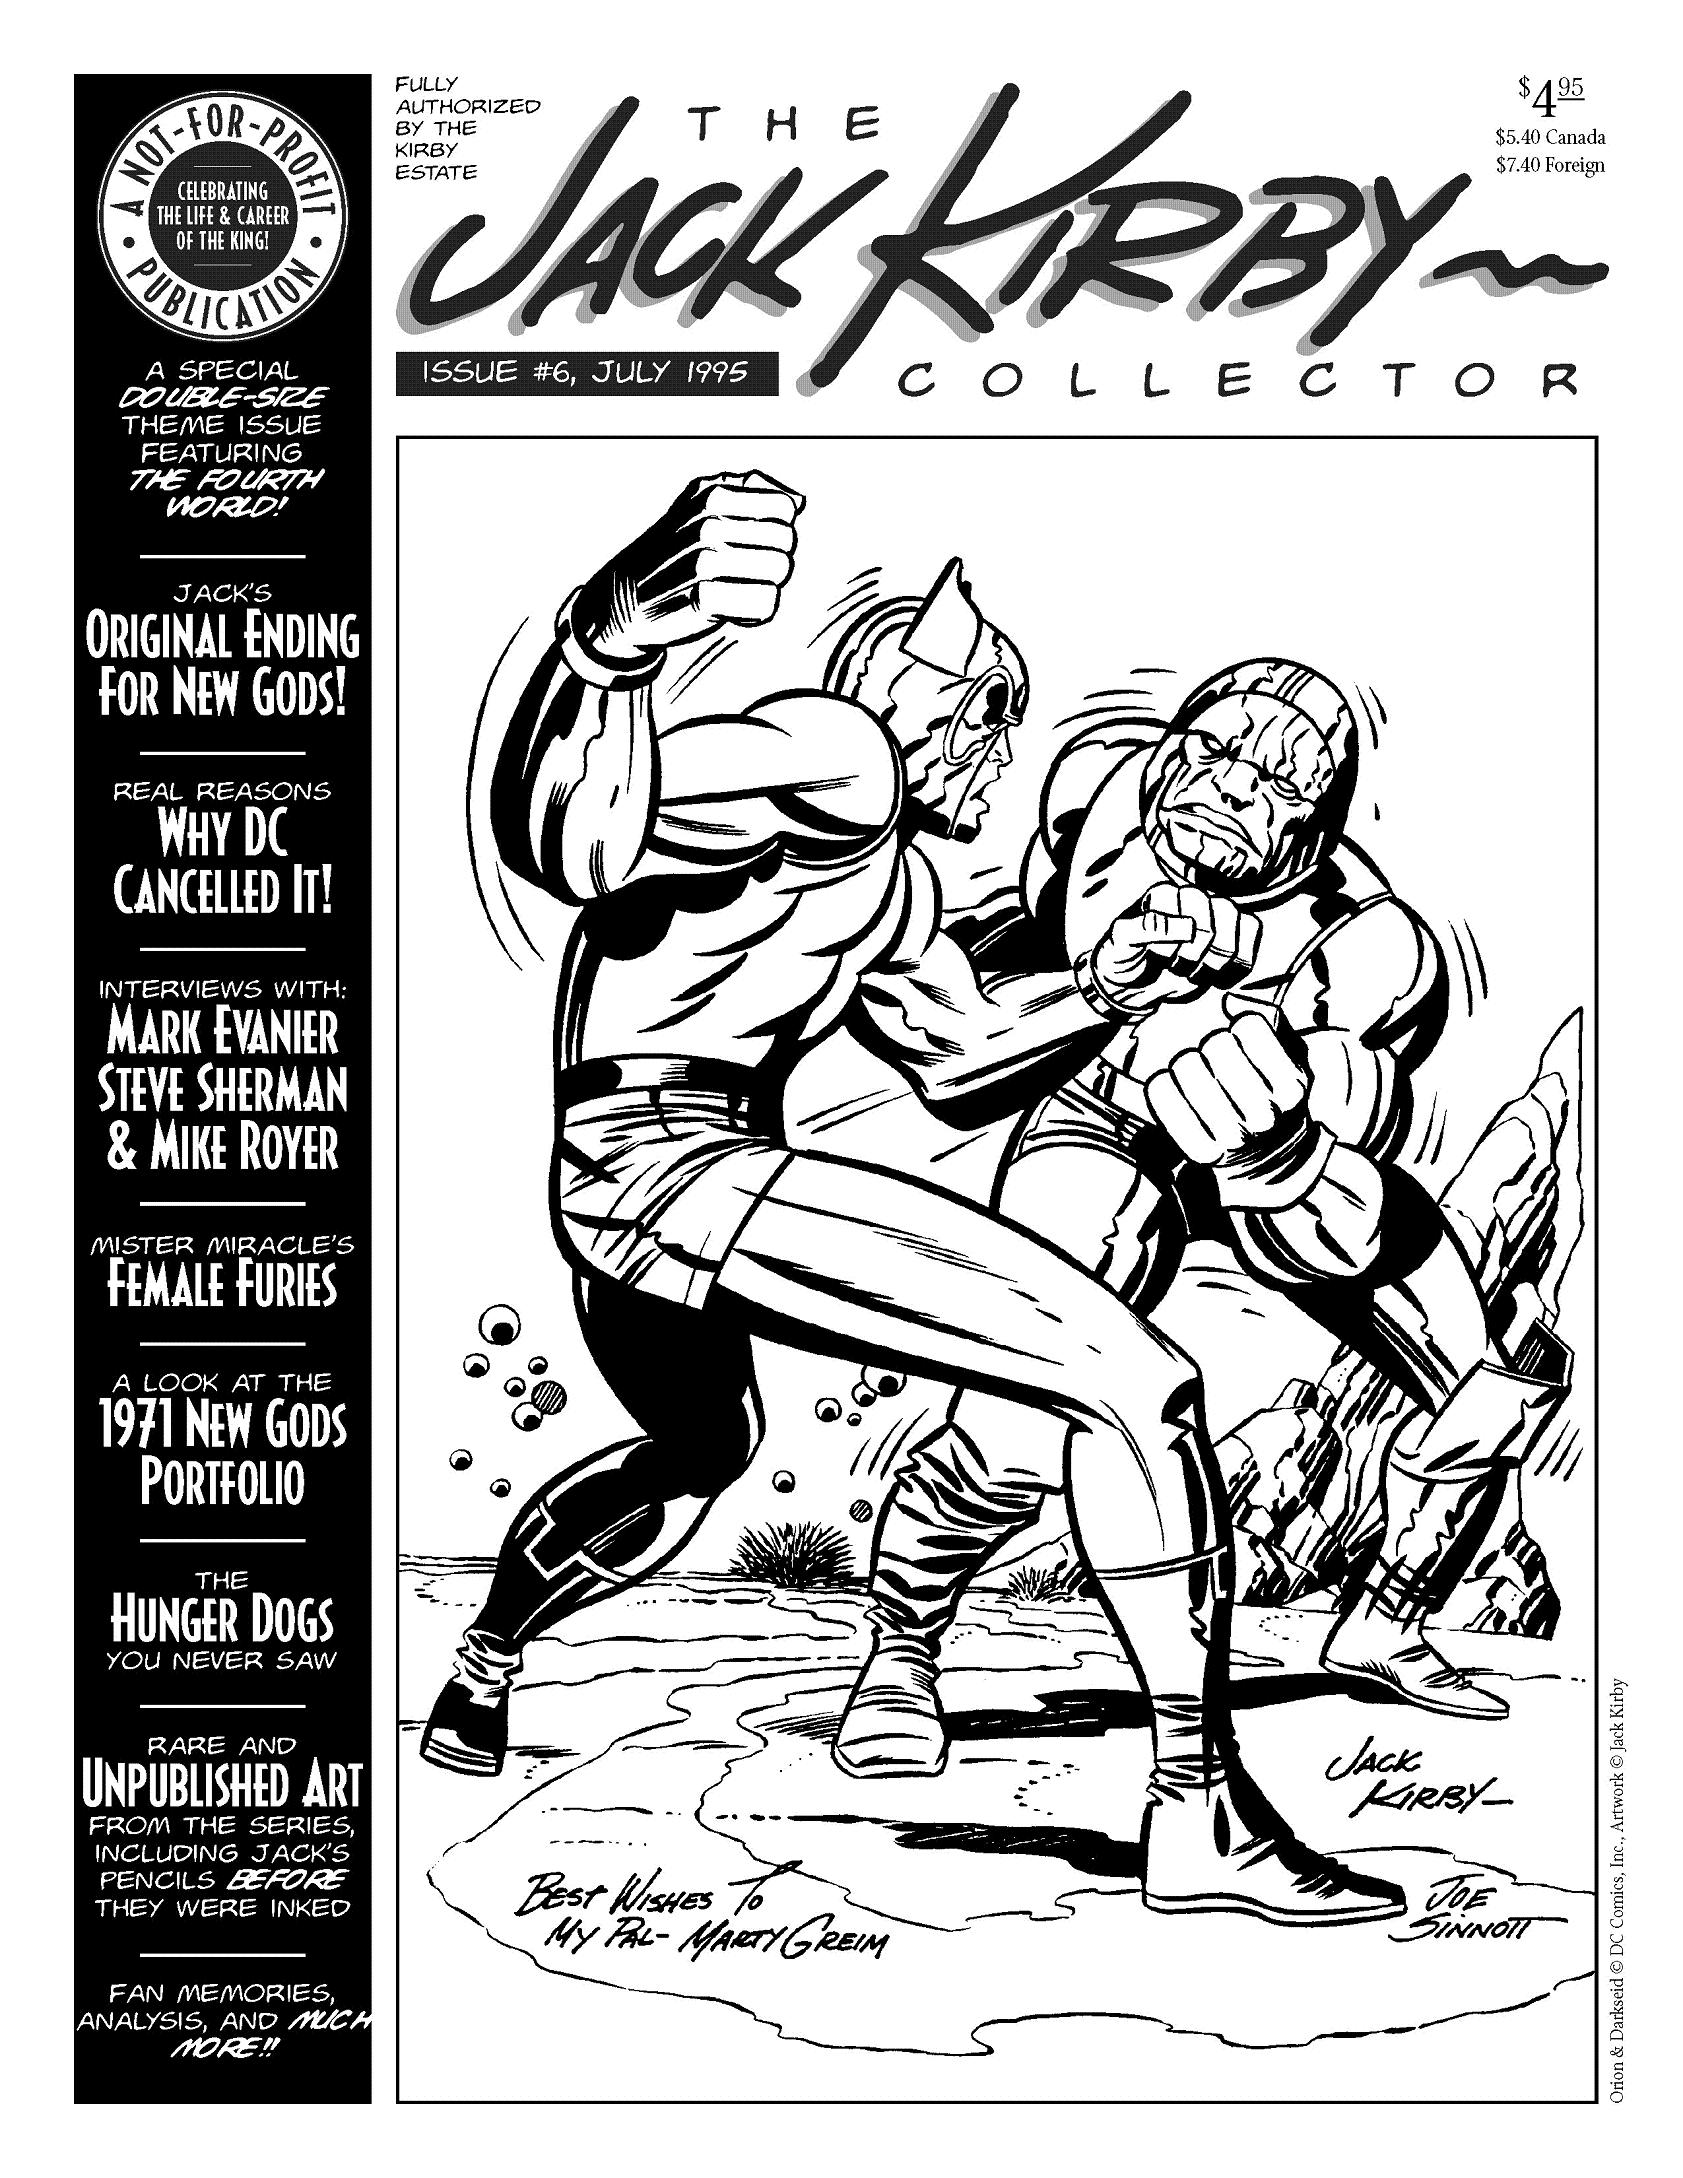 Read online The Jack Kirby Collector comic -  Issue #6 - 1